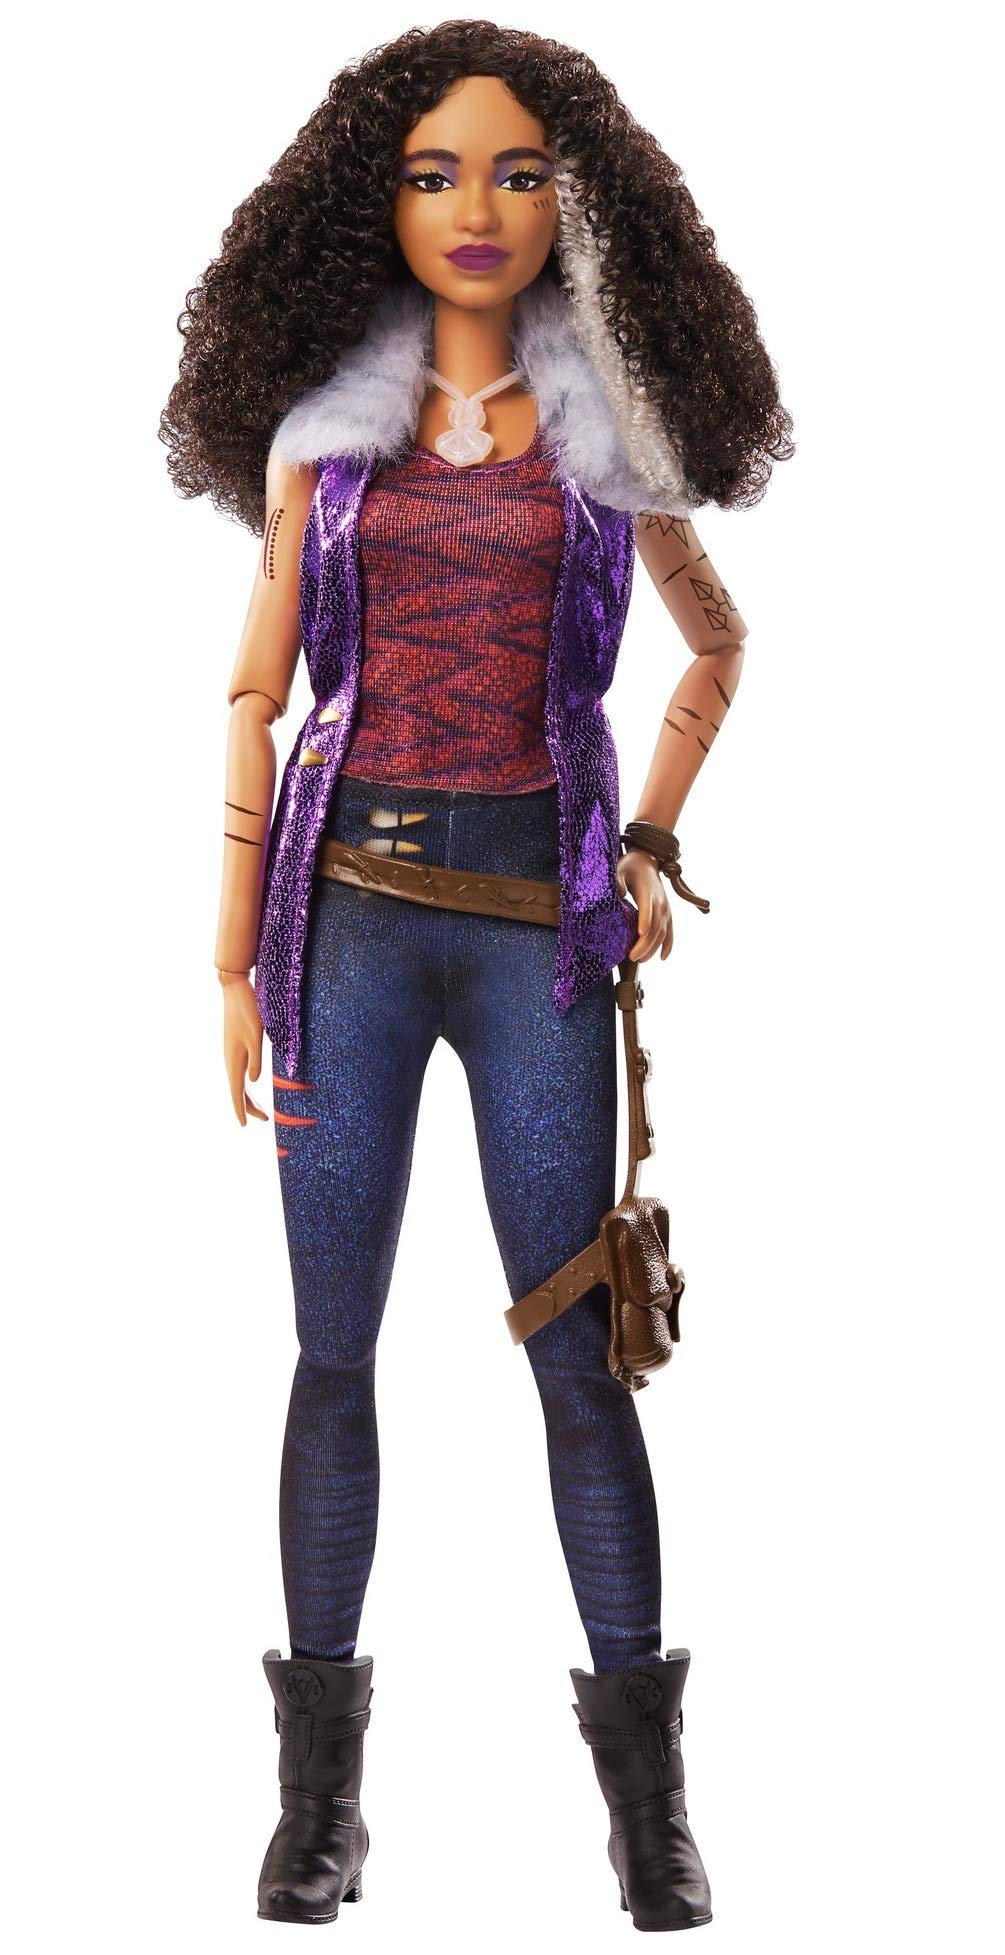 Disney’s Zombies 2, Willa Lykensen Werewolf Doll (11.5-inch) wearing Rocker Outfit and Accessories, 11 Bendable “Joints,” Great Gift for ages 5+ [Amazon Exclusive]